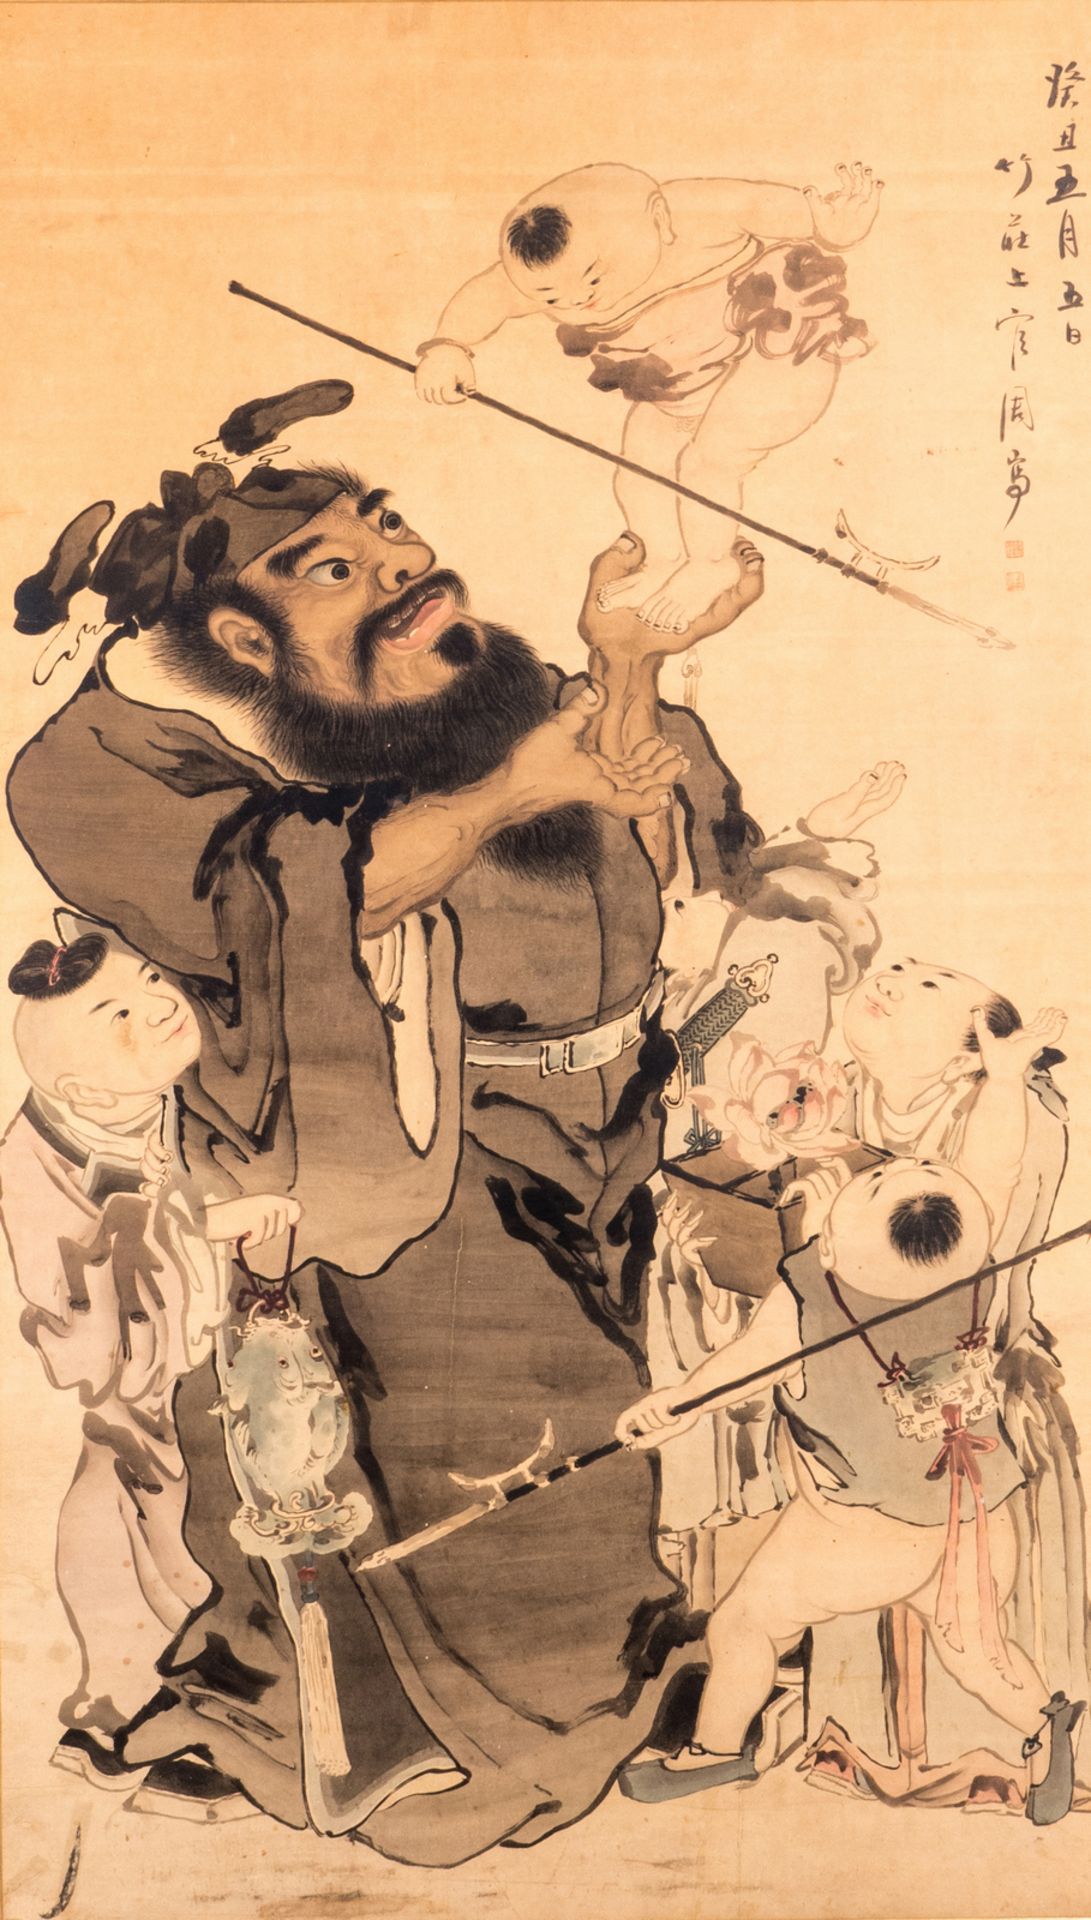 A fine Chinese watercolour depicting an animated scene, signed "Shangguang Zhou", 78 x 136 cm